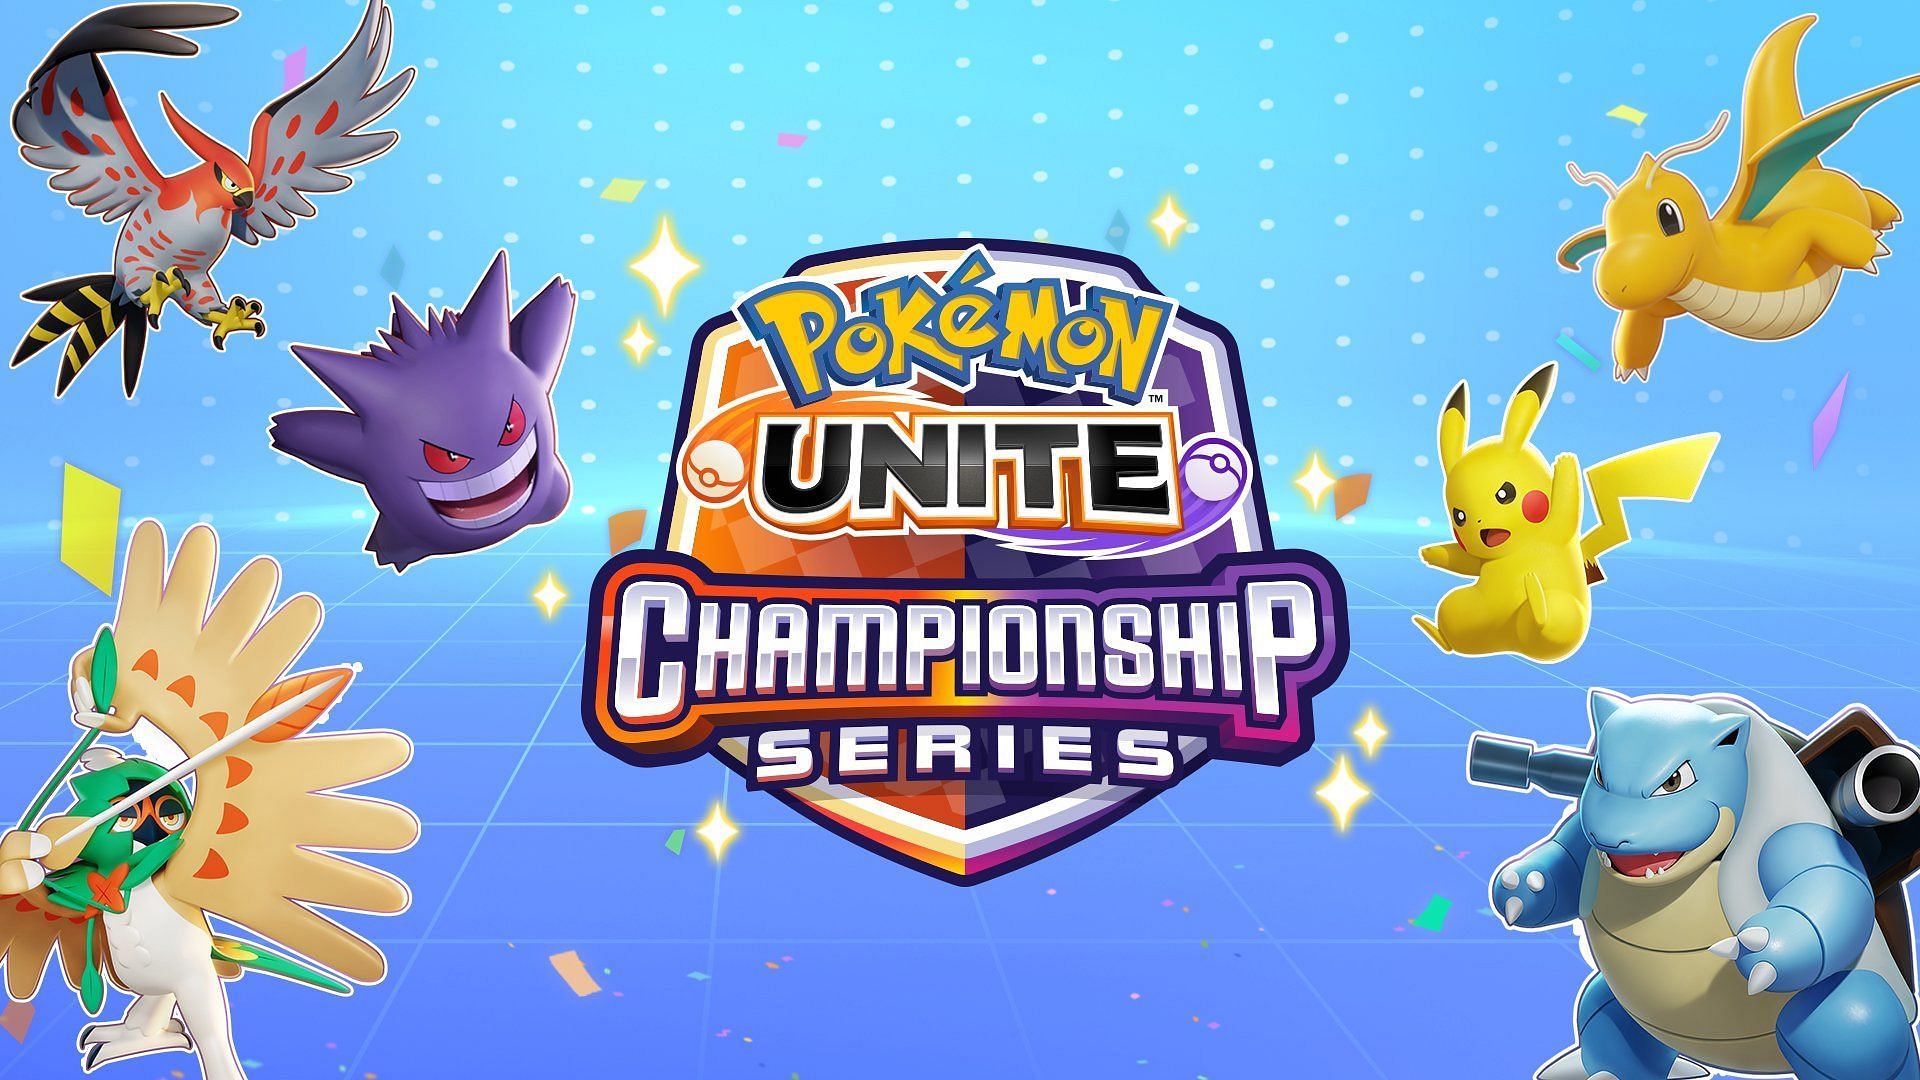 The Pokemon Unite World Championship Series registration will open later this month for the Regional Finals Last Chance Qualifiers (Image via Pokemon Unite)